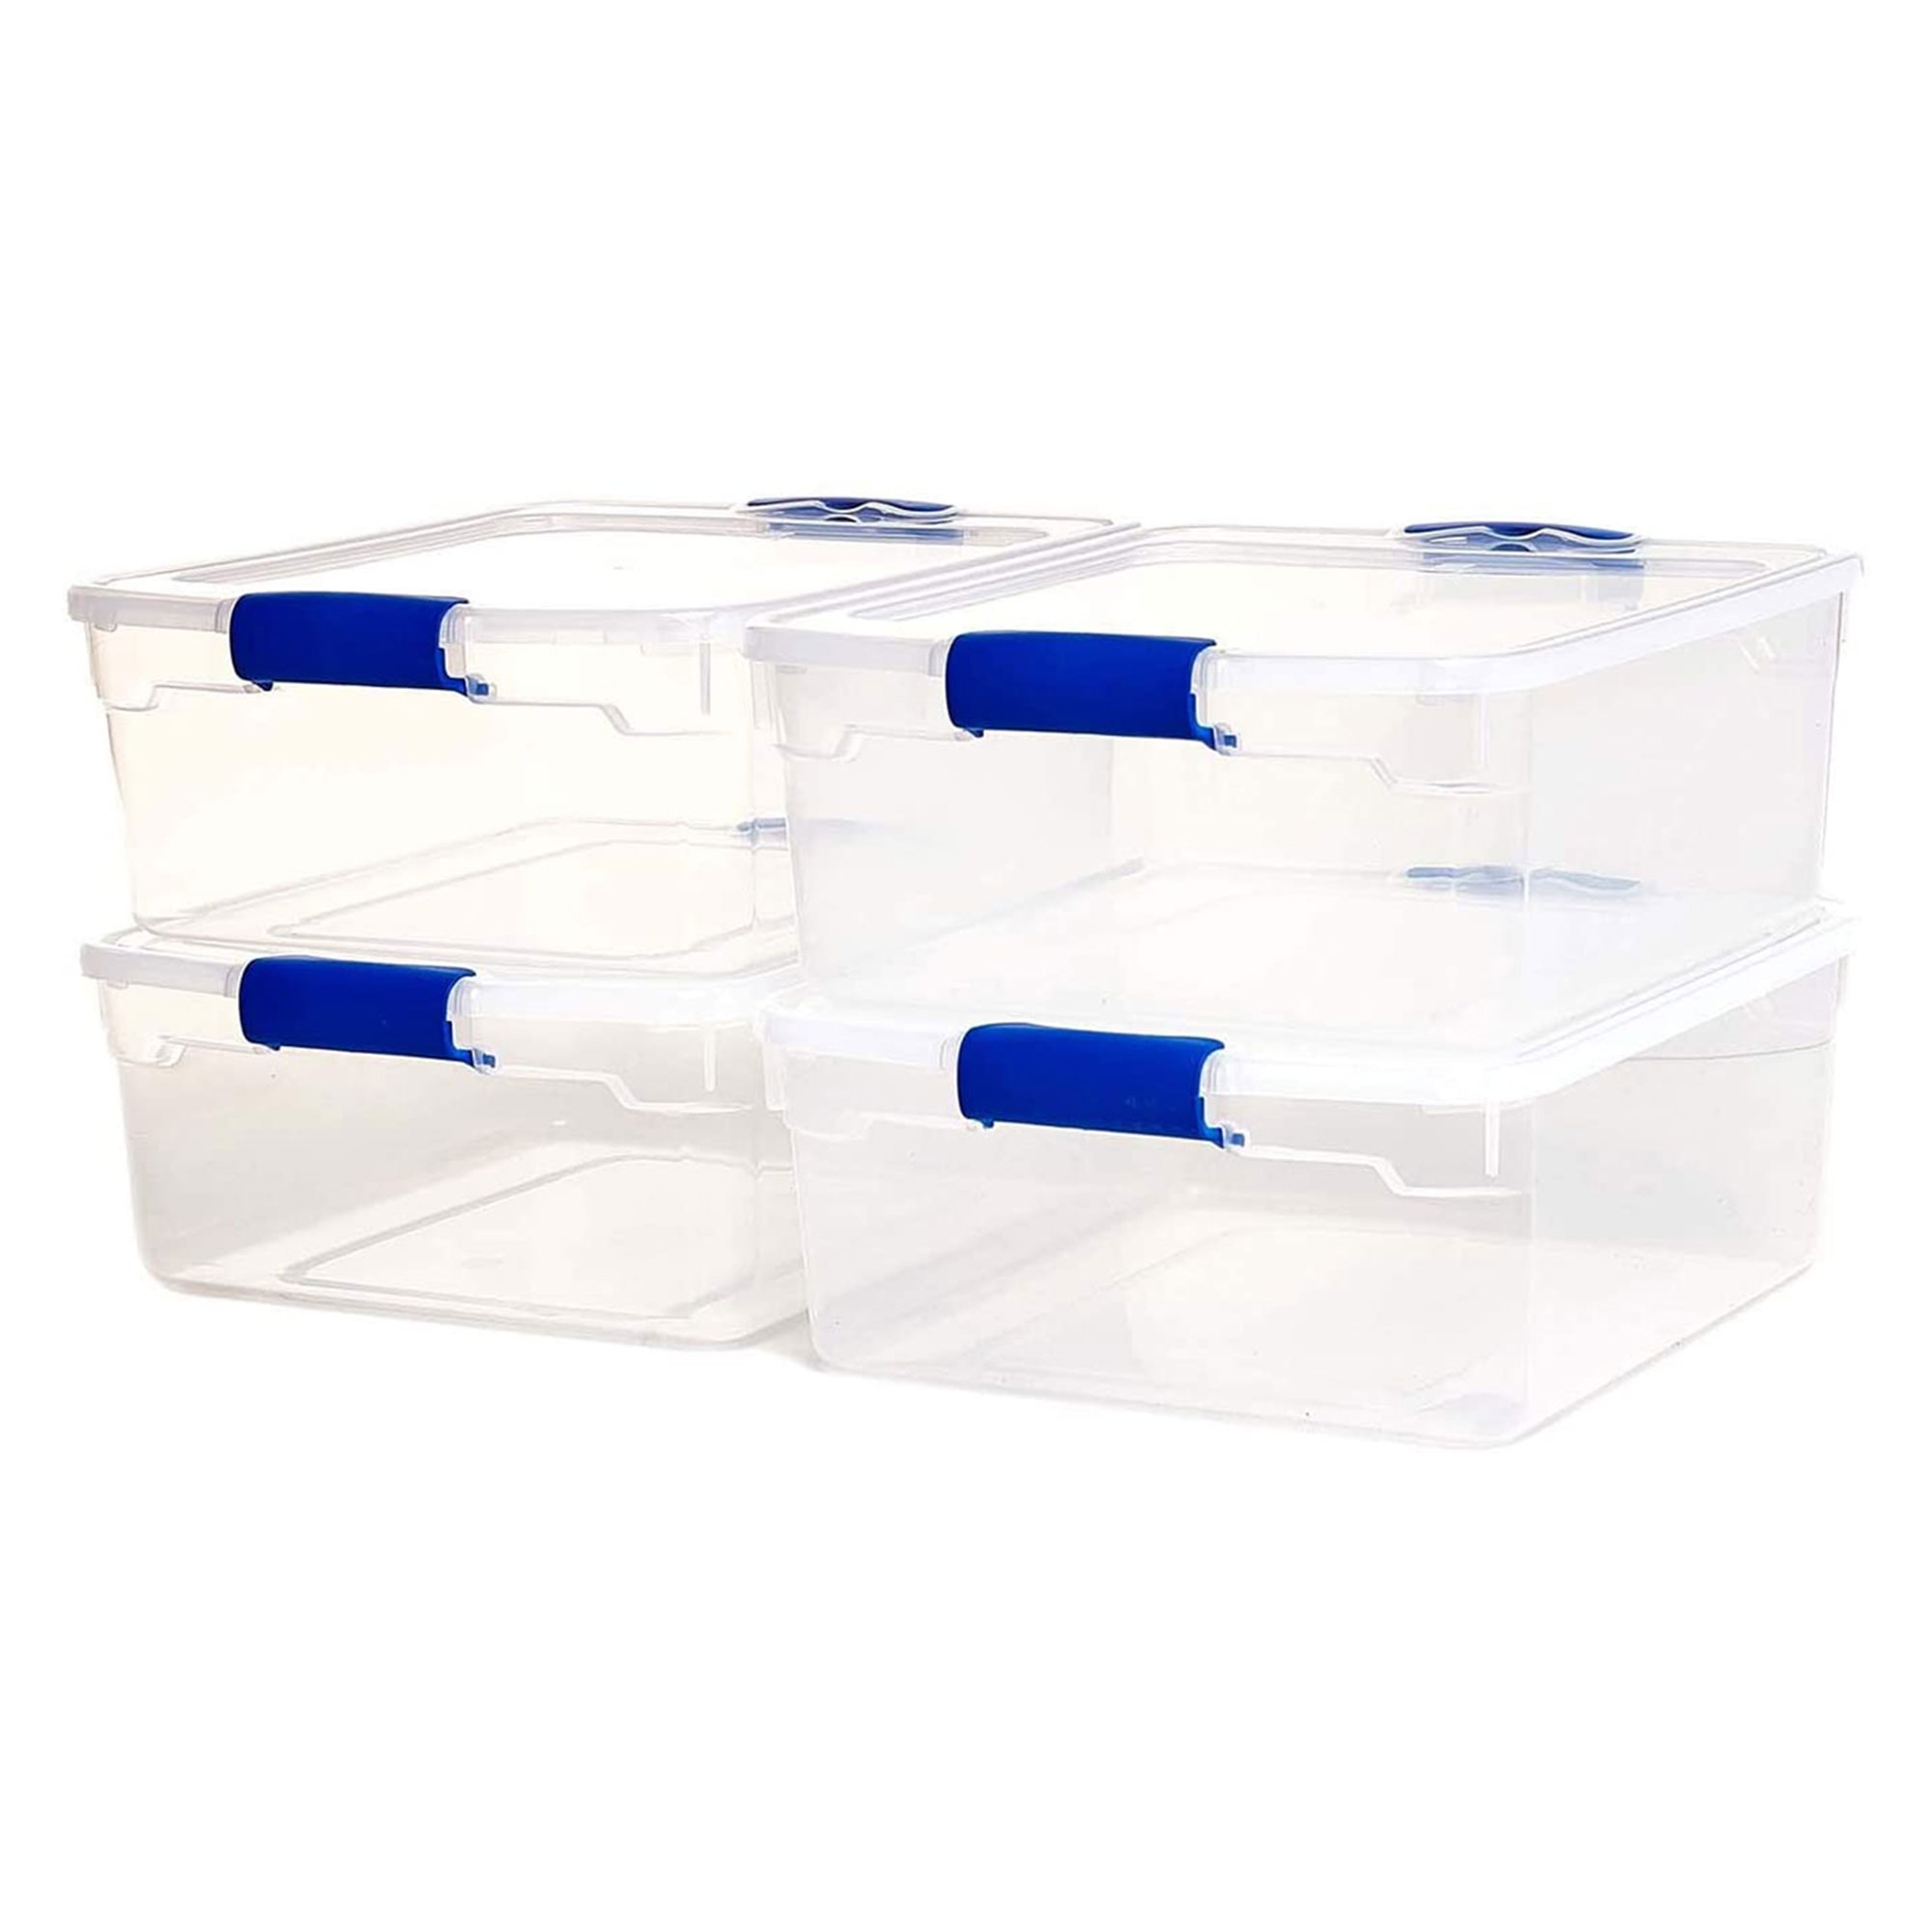 Homz 15.5 Qt Plastic Stackable Storage Containers with Lids, Clear (4 Pack) - image 1 of 7